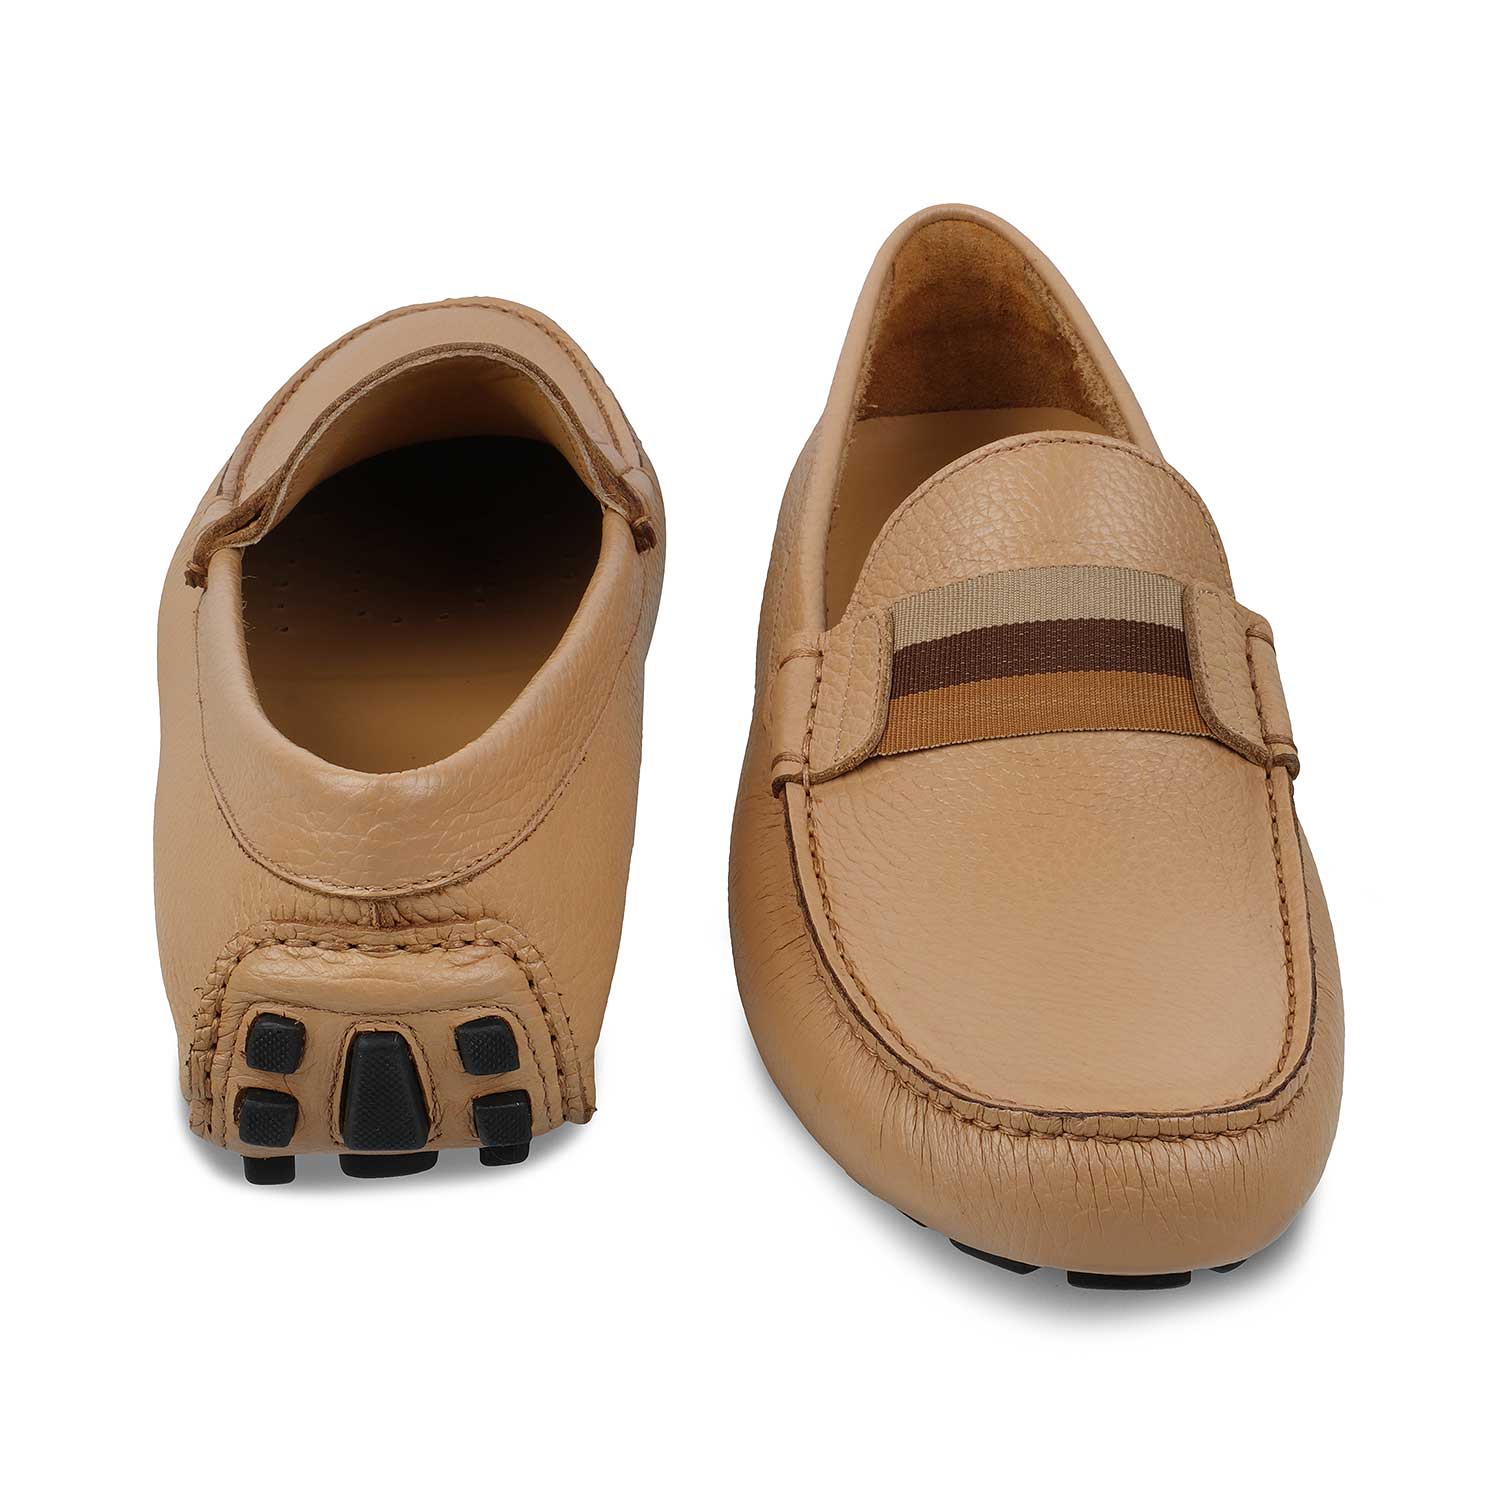 The Macario Beige Men's Handcrafted Leather Driving Loafers Tresmode